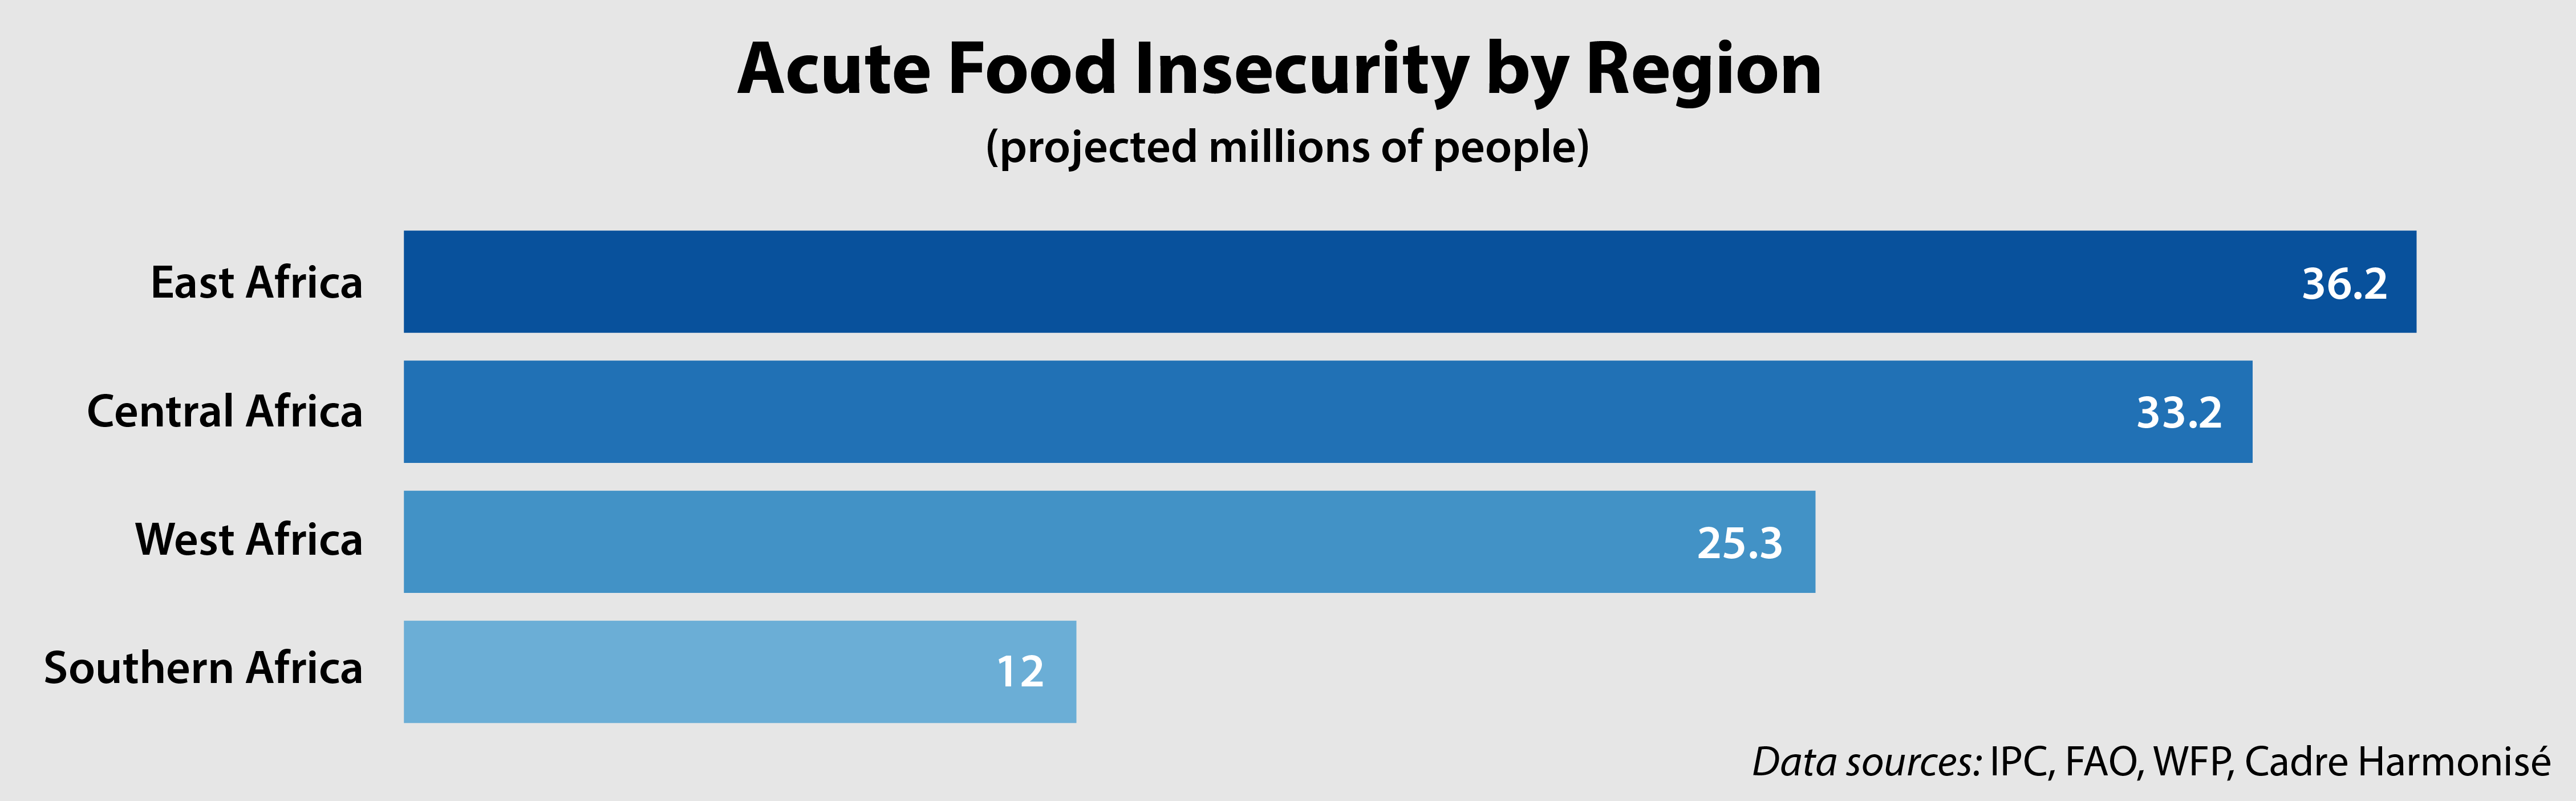 food insecurity in south africa essay